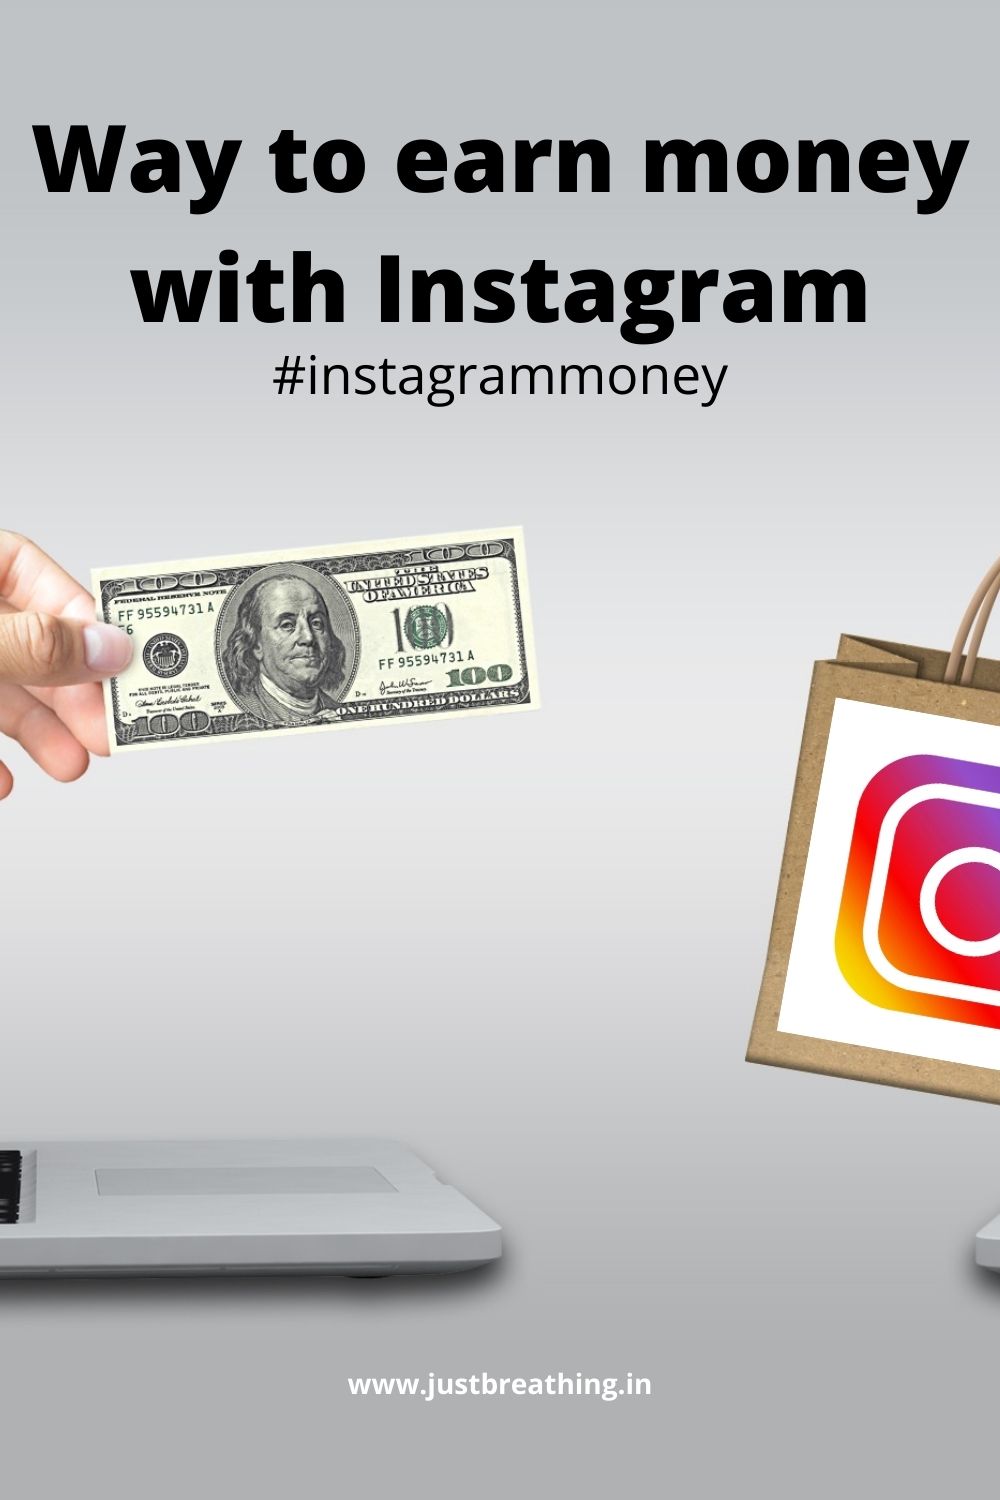 Ideas to make money with Instagram #instagrammoney Way to earn money with Instagram